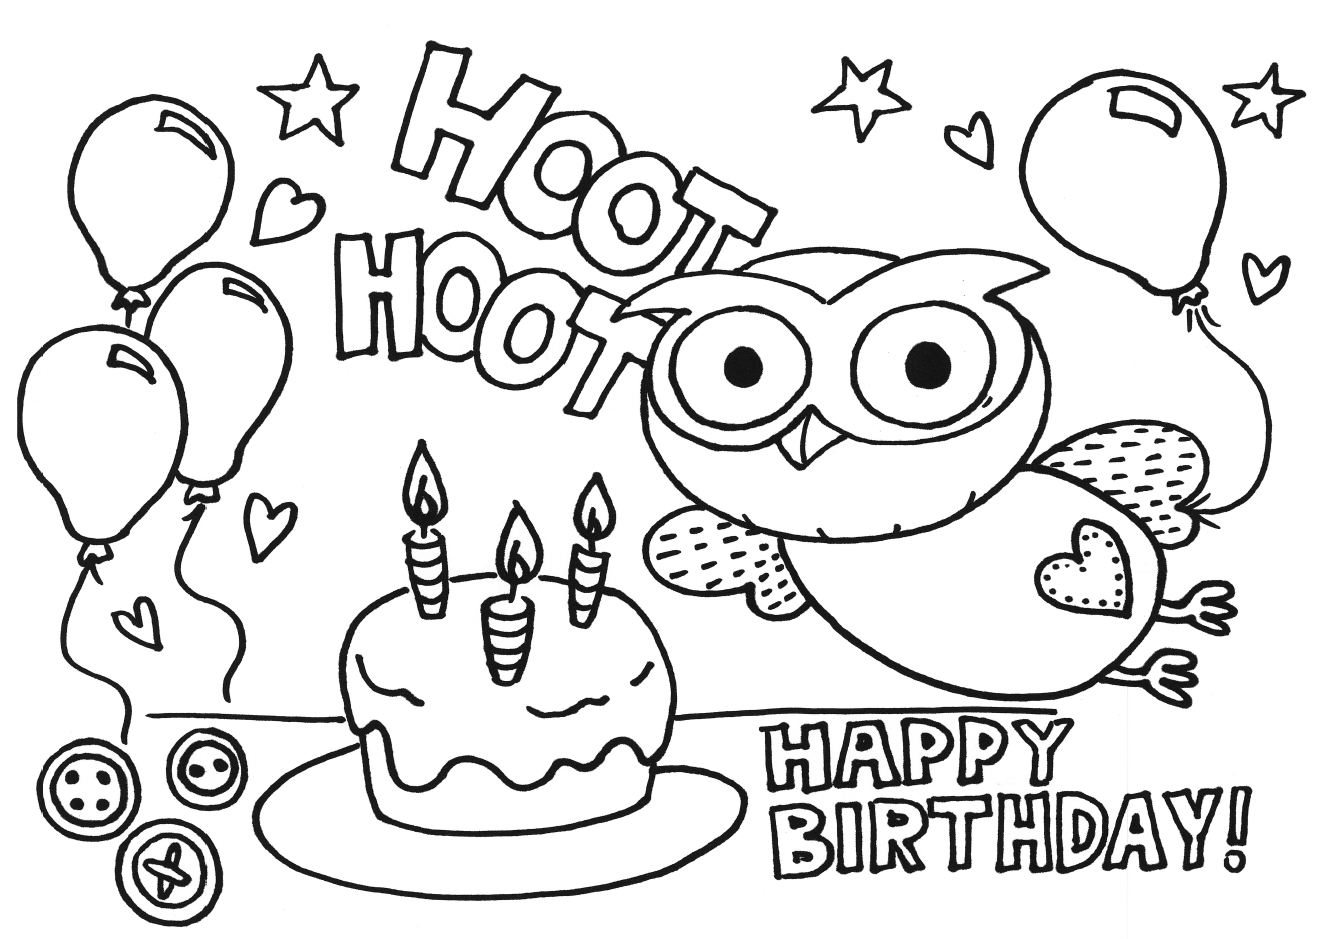 dinosaur-birthday-coloring-pages-at-getcolorings-free-printable-colorings-pages-to-print